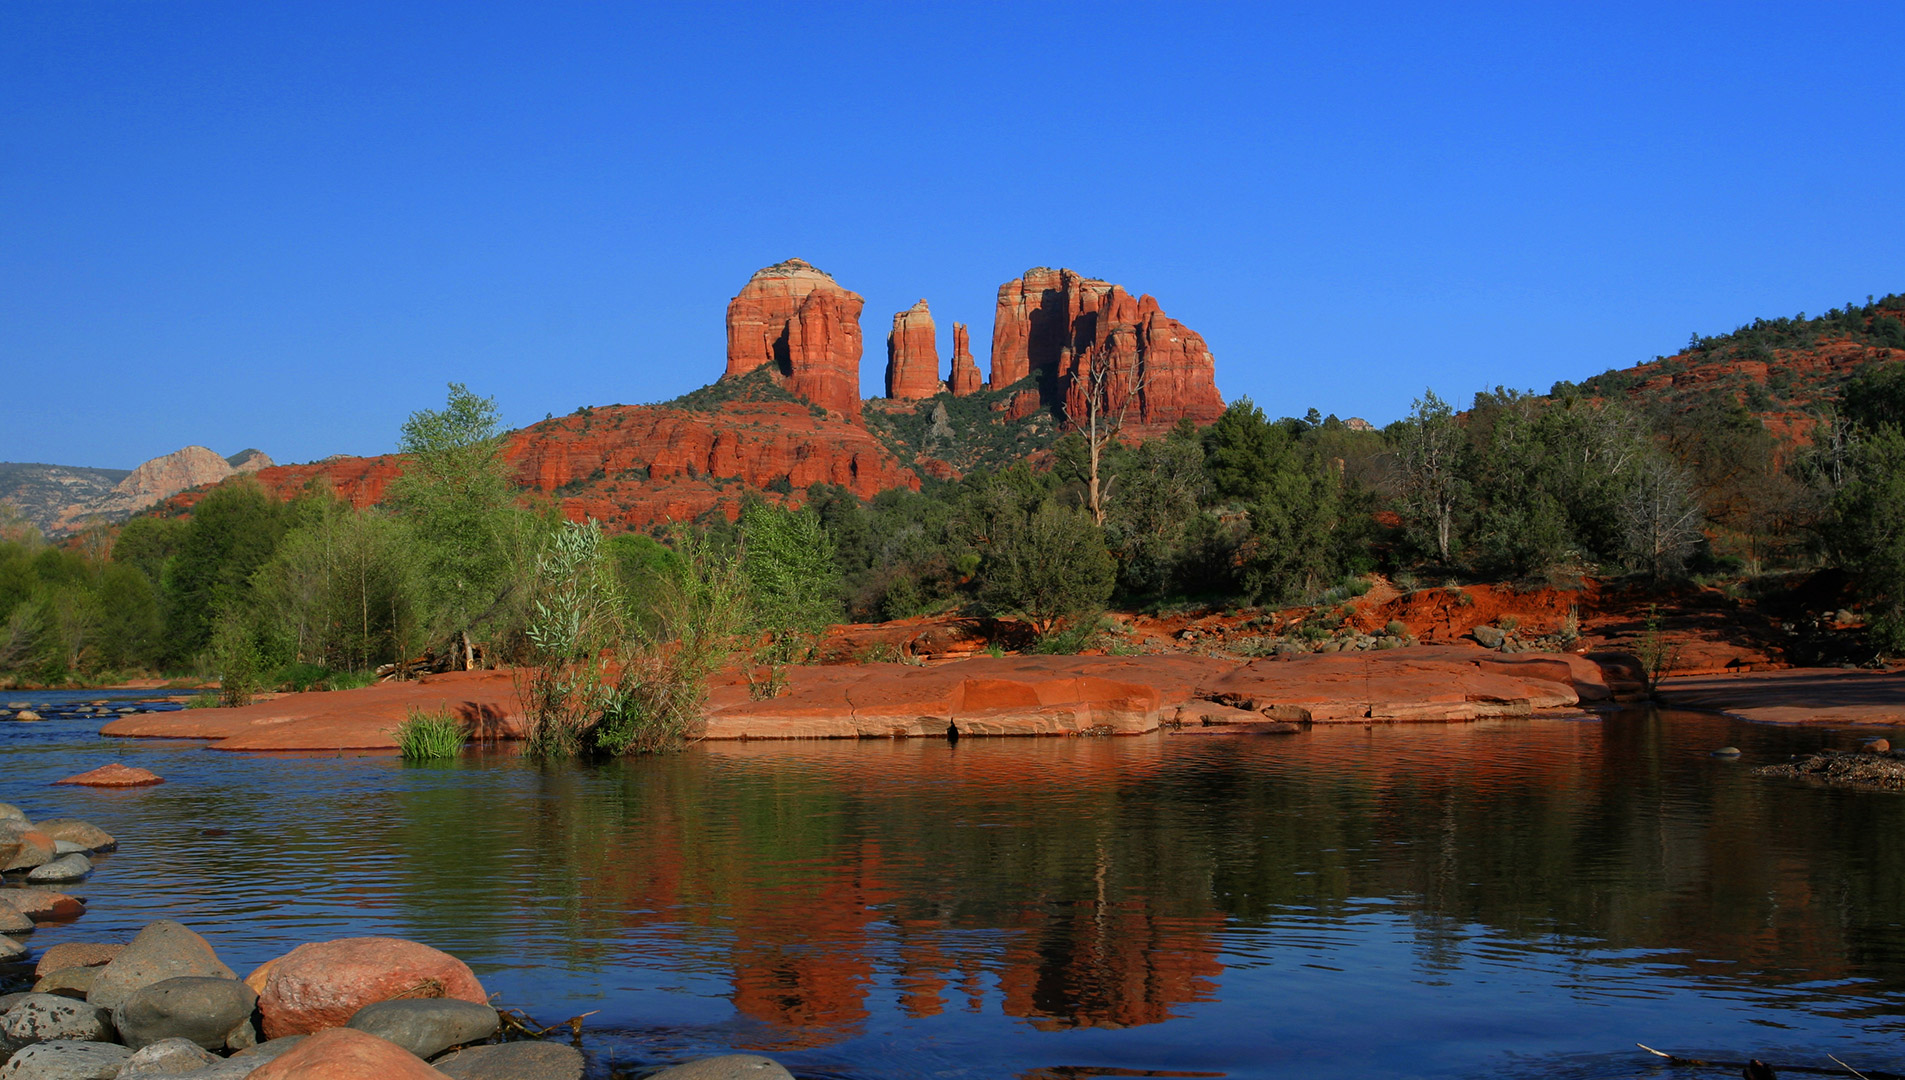 The tranquil waters of Oak Creek meander through Red Rock Crossing, while Cathedral Rock looms in the background